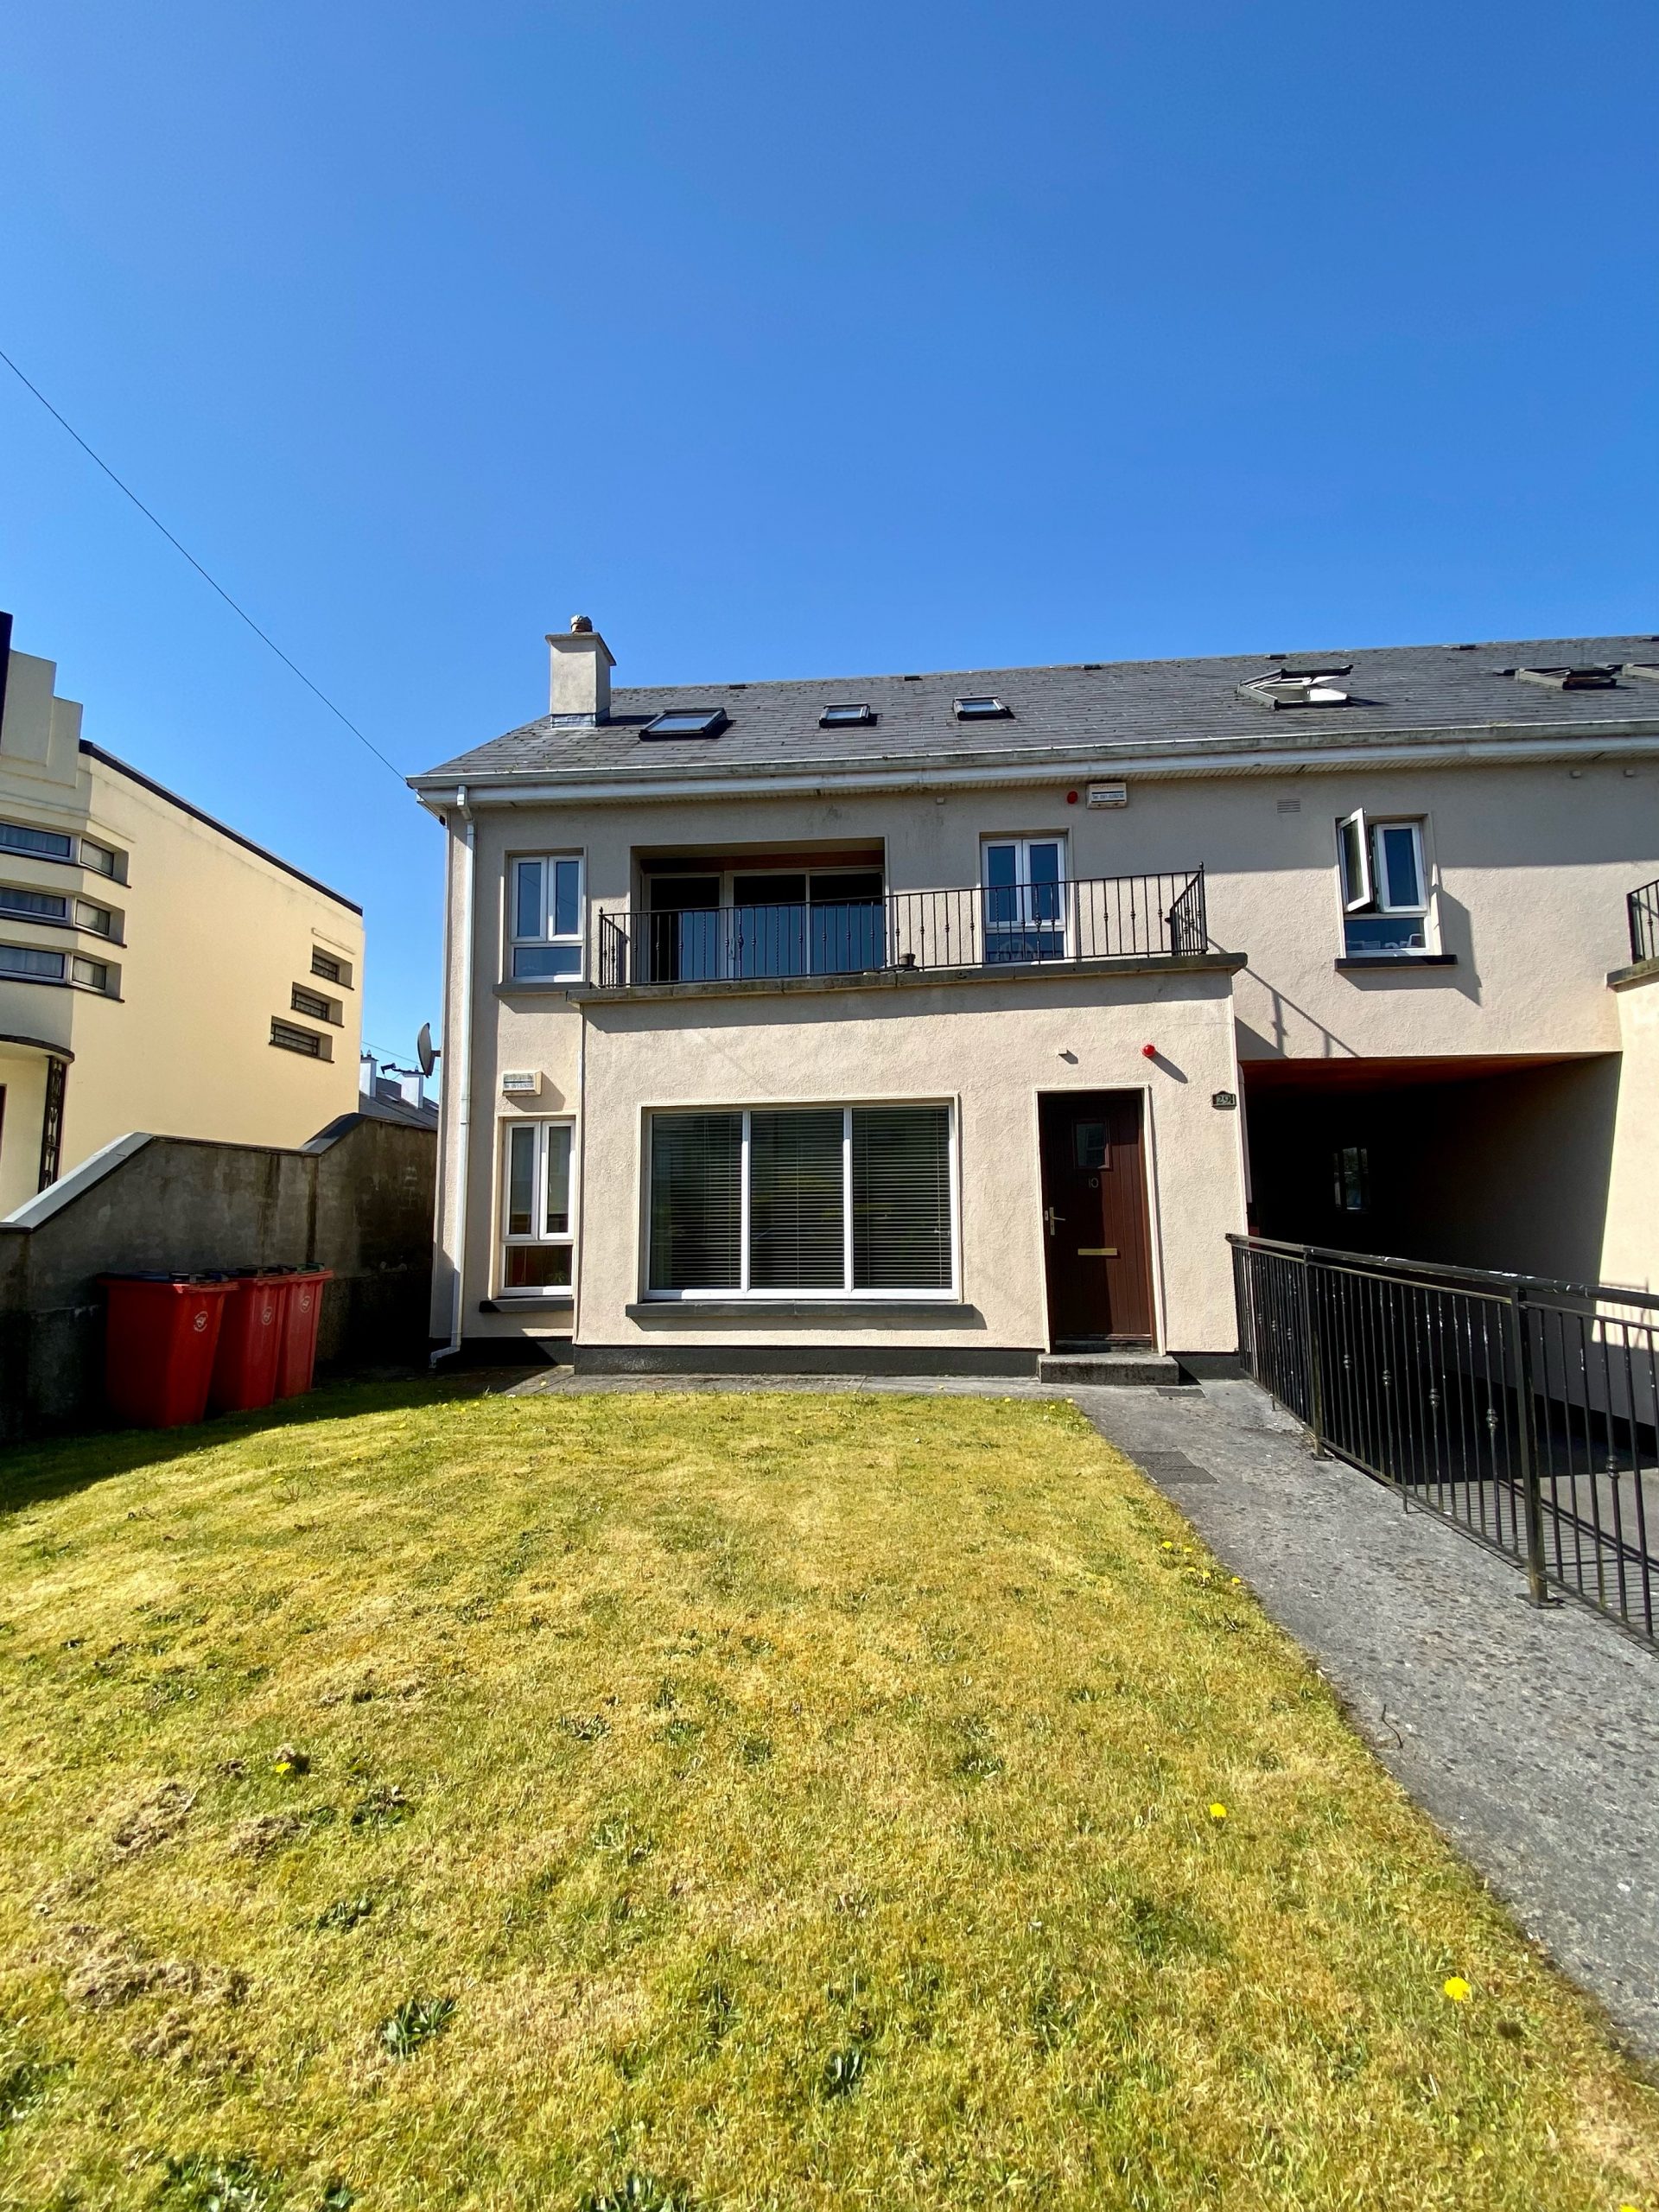 Apartment 10, Cuilin Apartments, Newcastle, Co. Galway